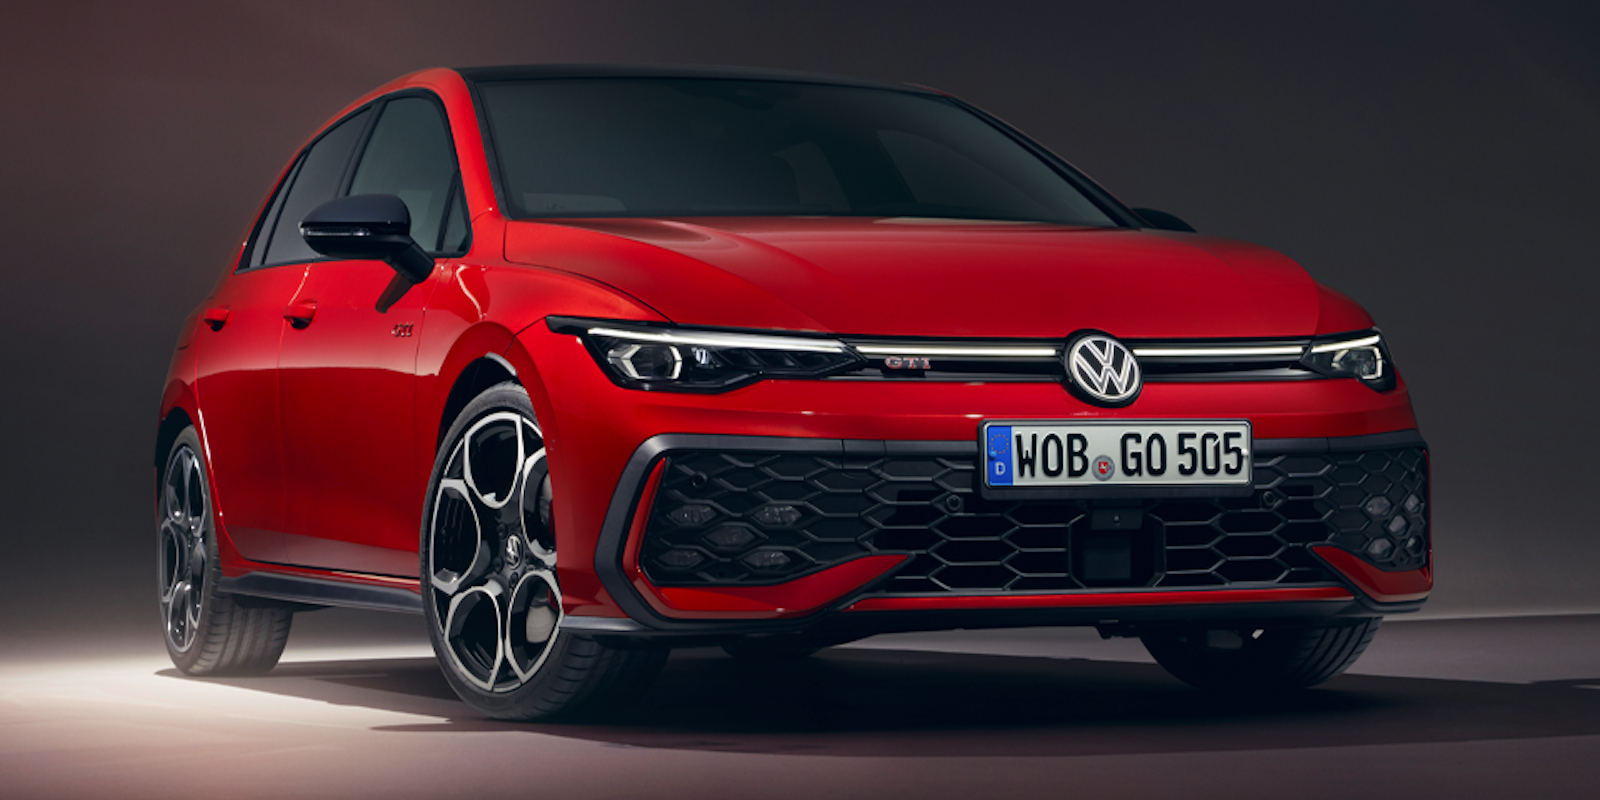 New Volkswagen Golf revealed: mid-life update for iconic hatchback